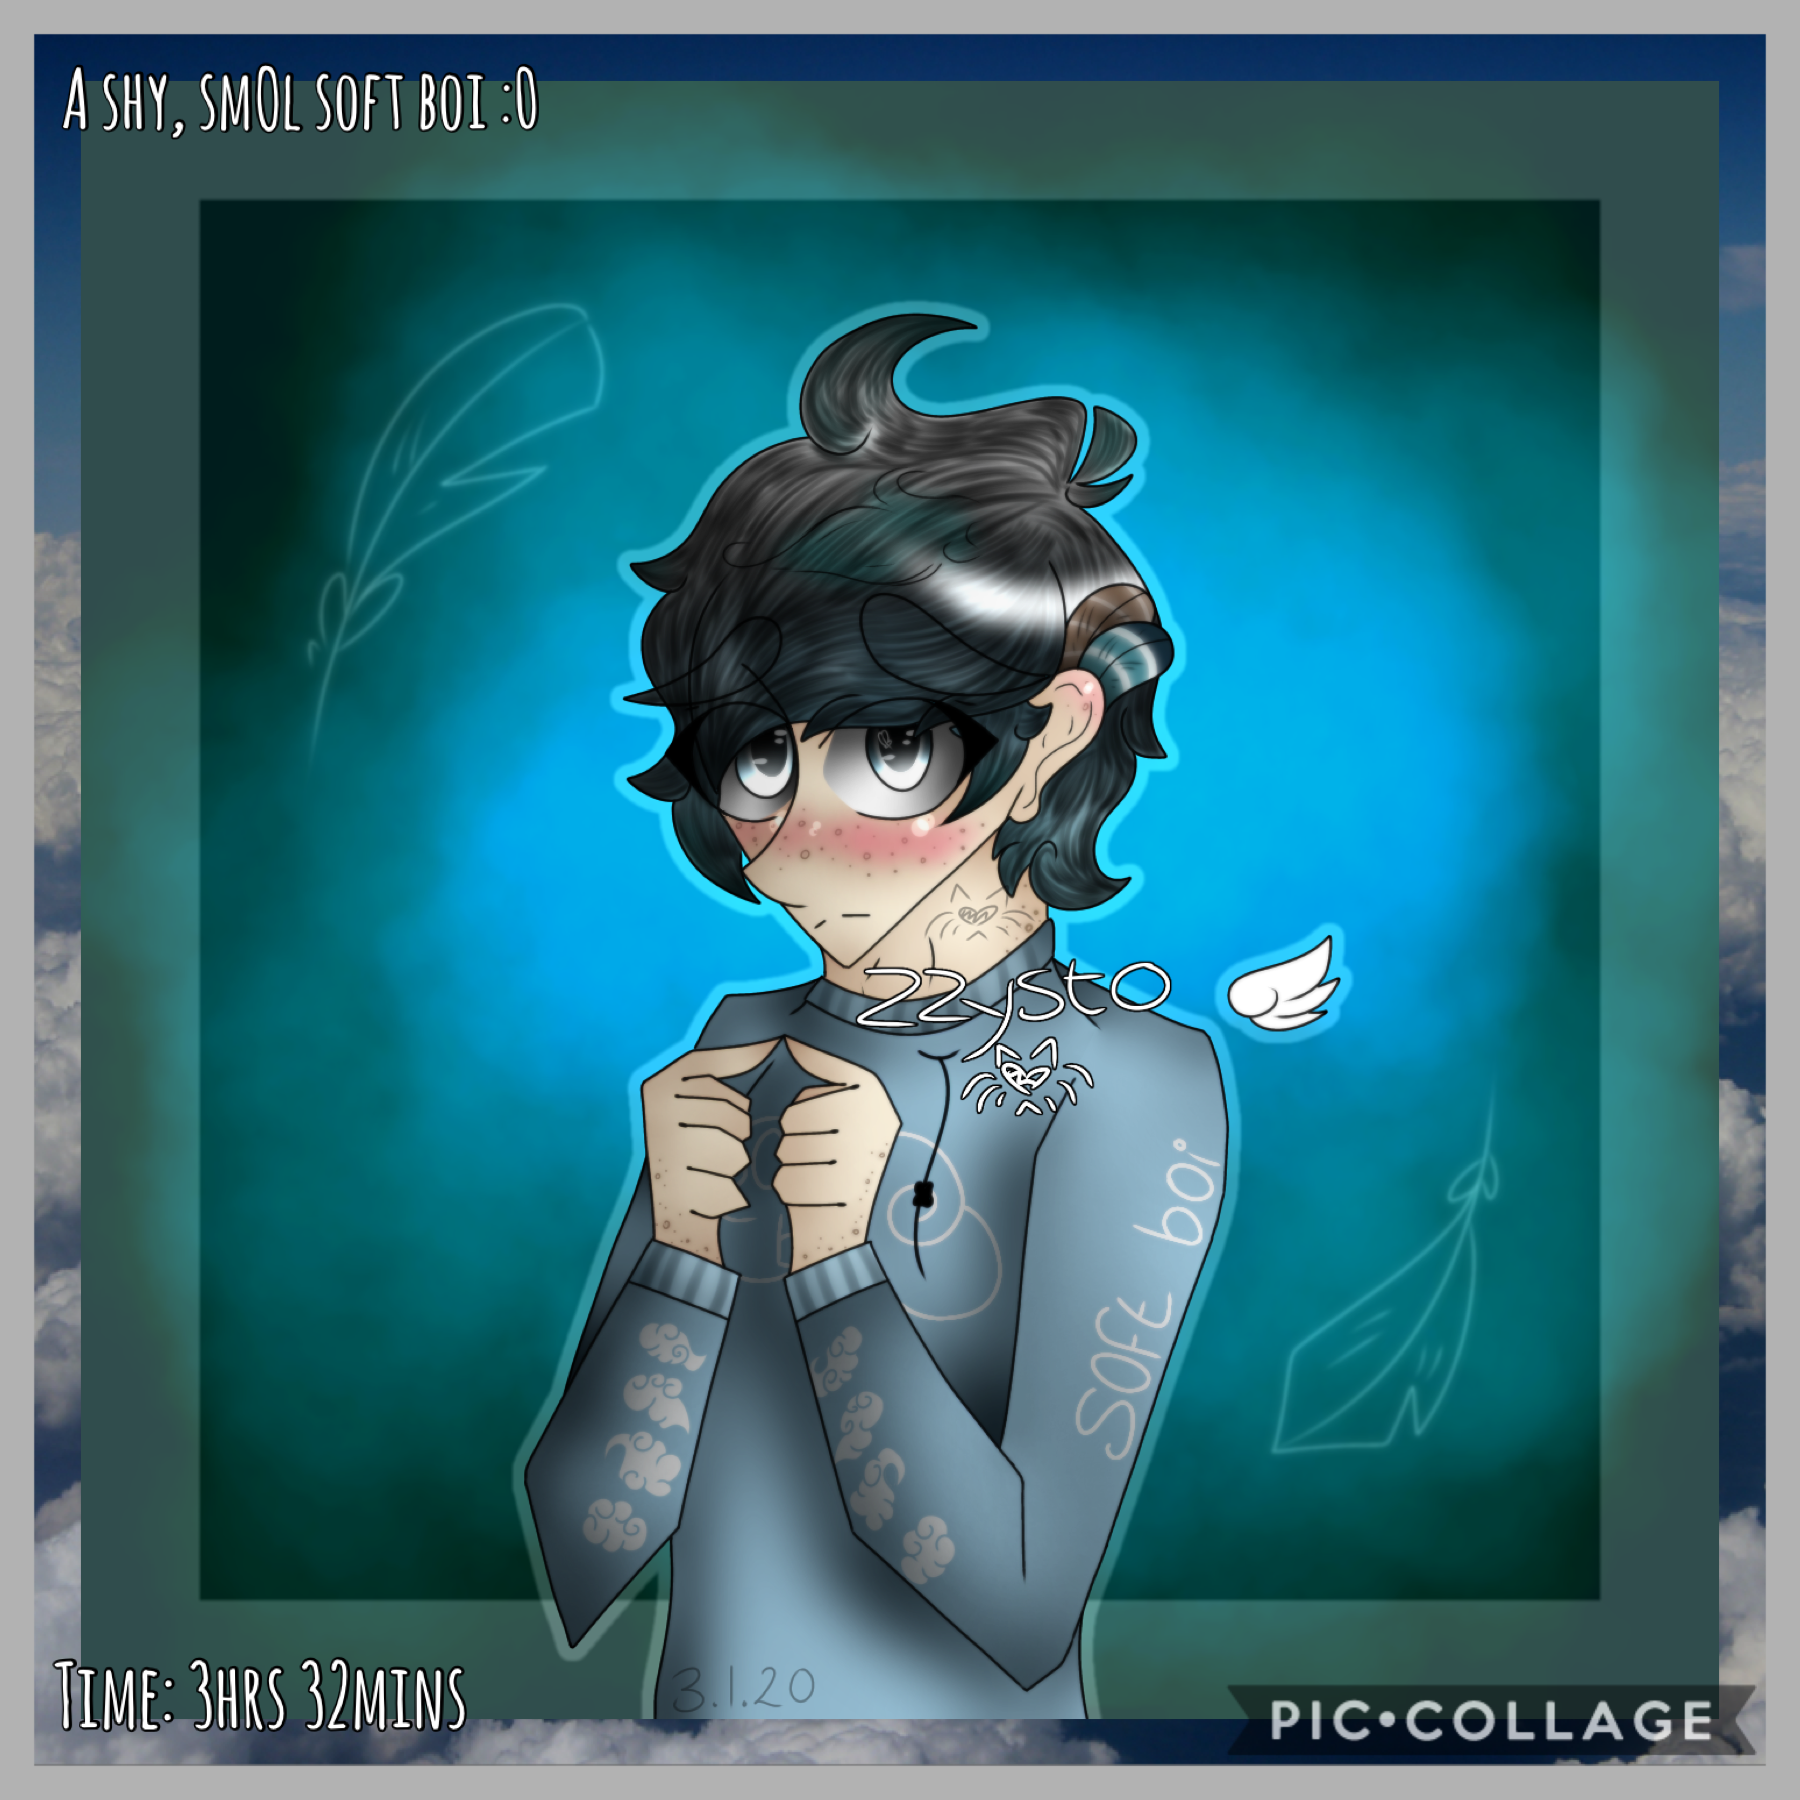 🌃Tap🌃
-Look in Remixes-
This was my actually my first drawing of 2020 lol-
yeye I blurred Charles for this to add to the soft nature of it, hehe owo
aAa I feel really hAppy and confident right now eEe I hope it lAsts- x3